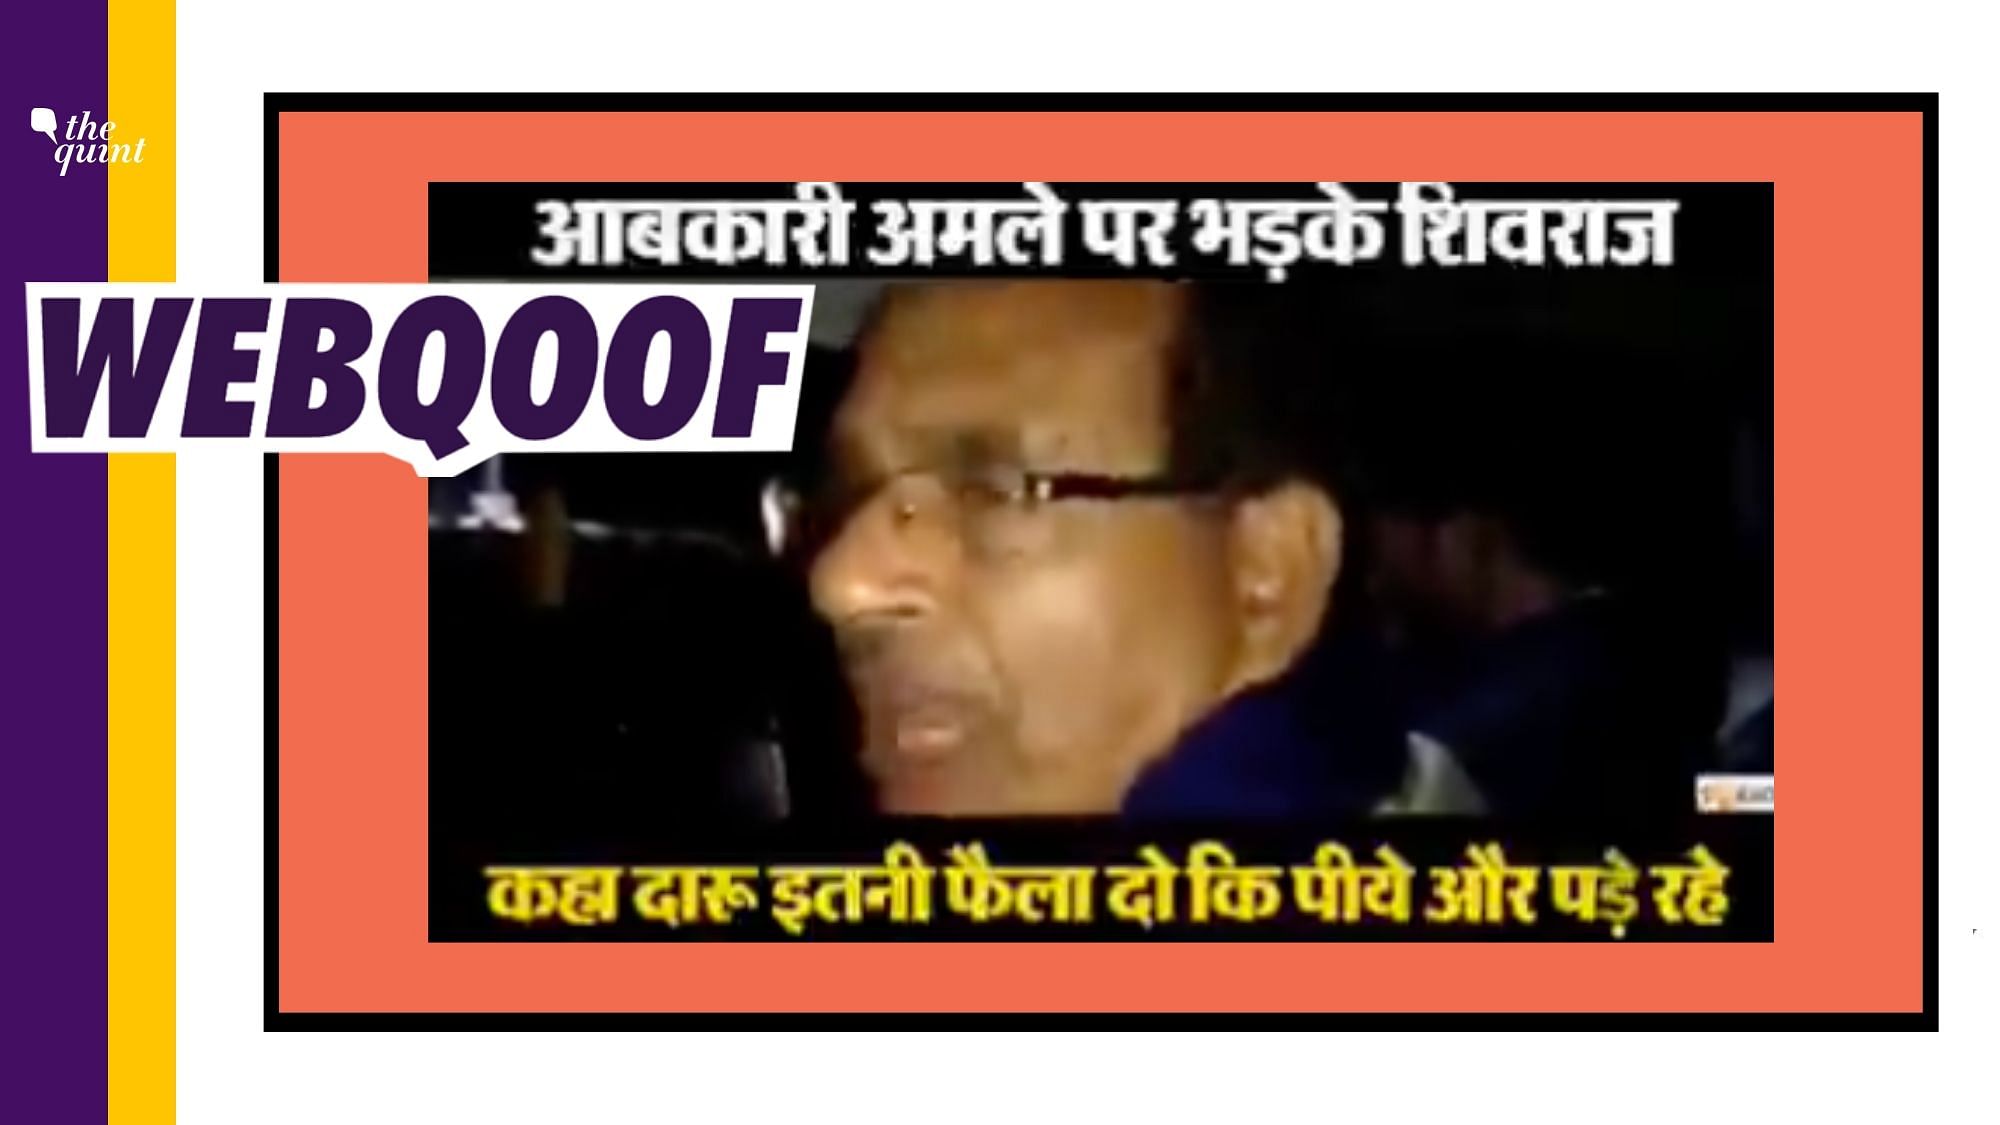 An old and edited video was circulated to claim that Shivraj Singh Chouhan encouraged selling of more alcohol in the state.